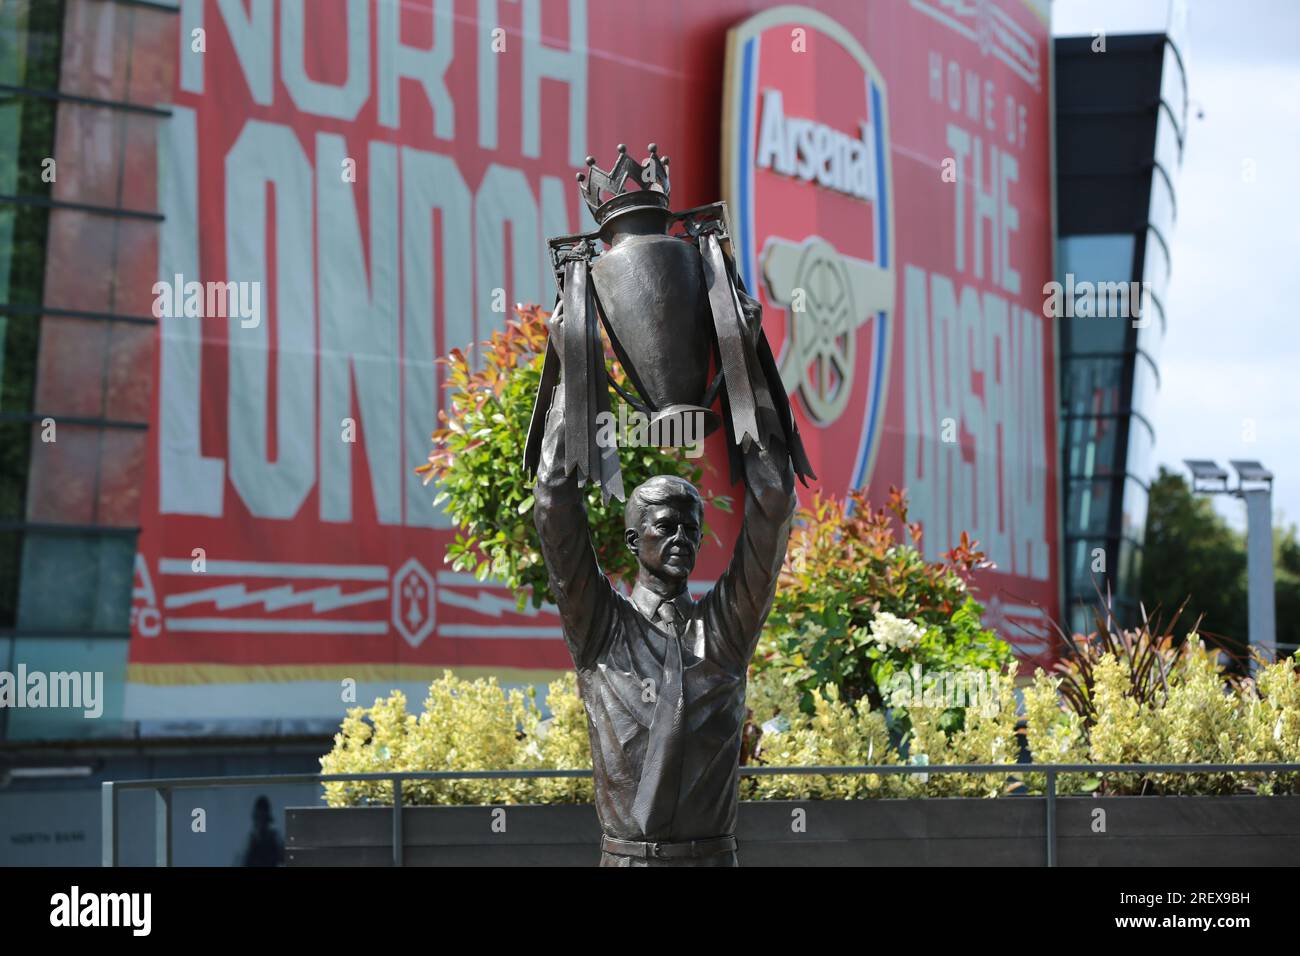 London, UK. 30 July 2023. Arsenal unveil Arsène Wenger statue outside the Emirates Stadium to commemorate the Gunners iconic manager's 22-year tenure at the club. The legendary manager led Arsenal FC to three Premier League titles, including the famous Invincibles season in 2003/04 where his side remained unbeaten, and seven FA Cups. The bronze statue, which was created by sculptor Jim Guy, is 3.5 metres high and weighs approximately half a tonne, and depicts the former French manager lifting the Premier League trophy. Credit: Waldemar Sikora/Alamy Live News Stock Photo